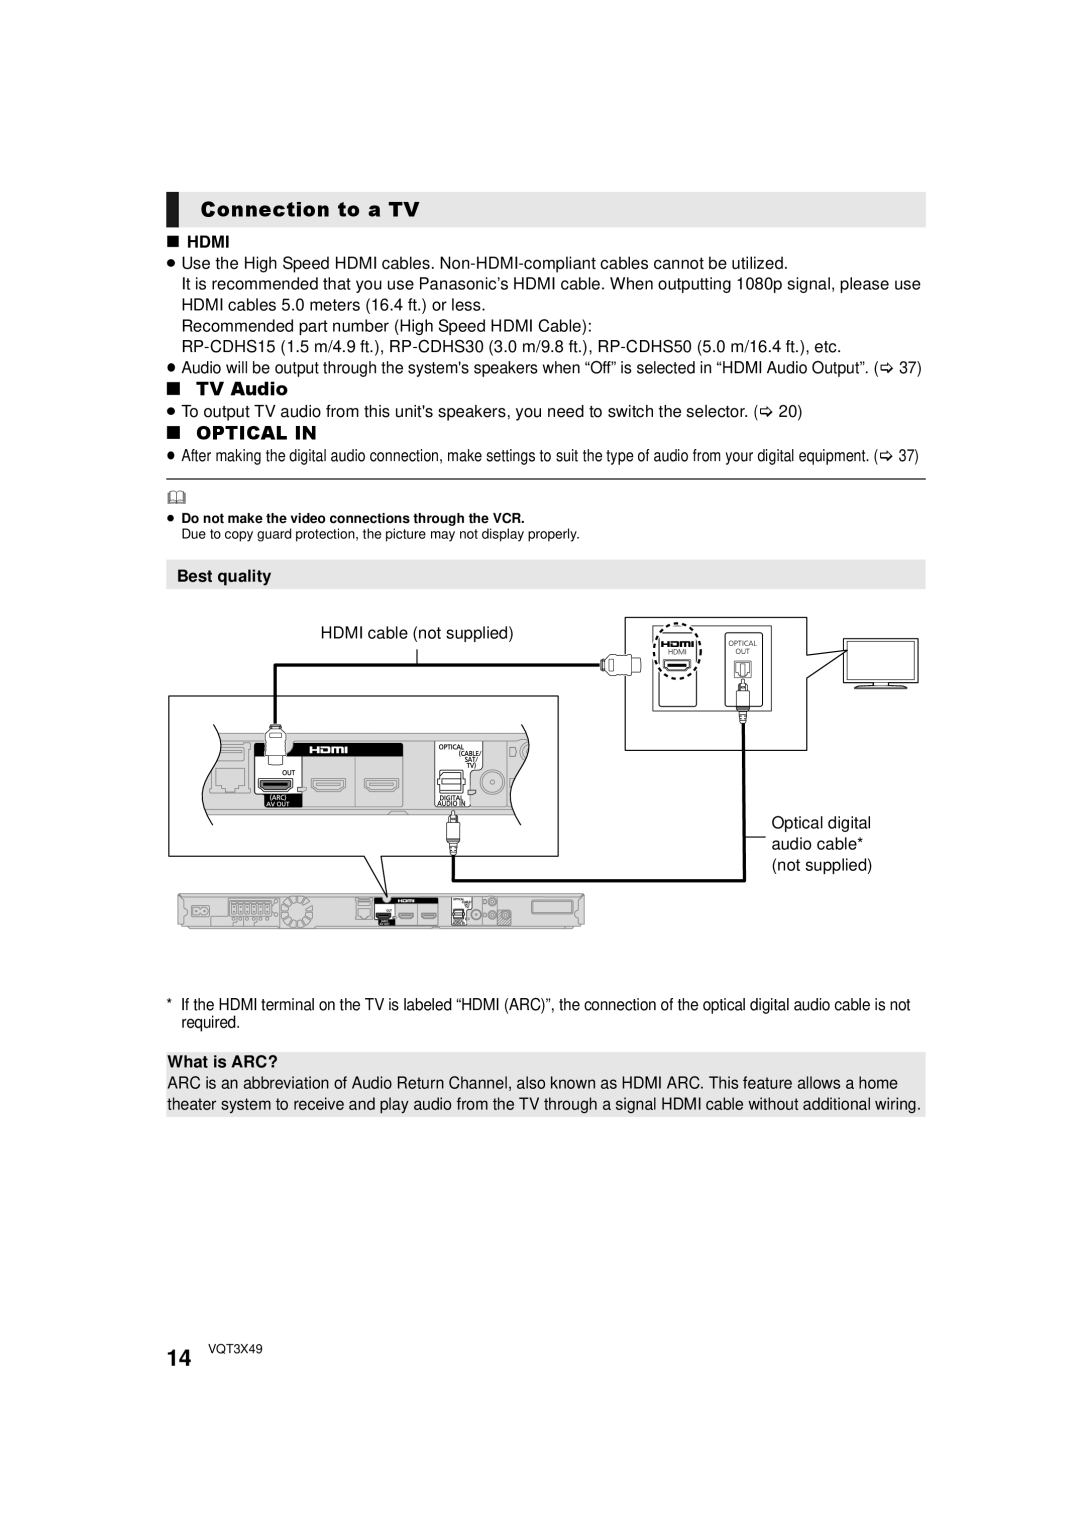 Panasonic SC-BTT490 owner manual Connection to a TV, TV Audio, Optical In 